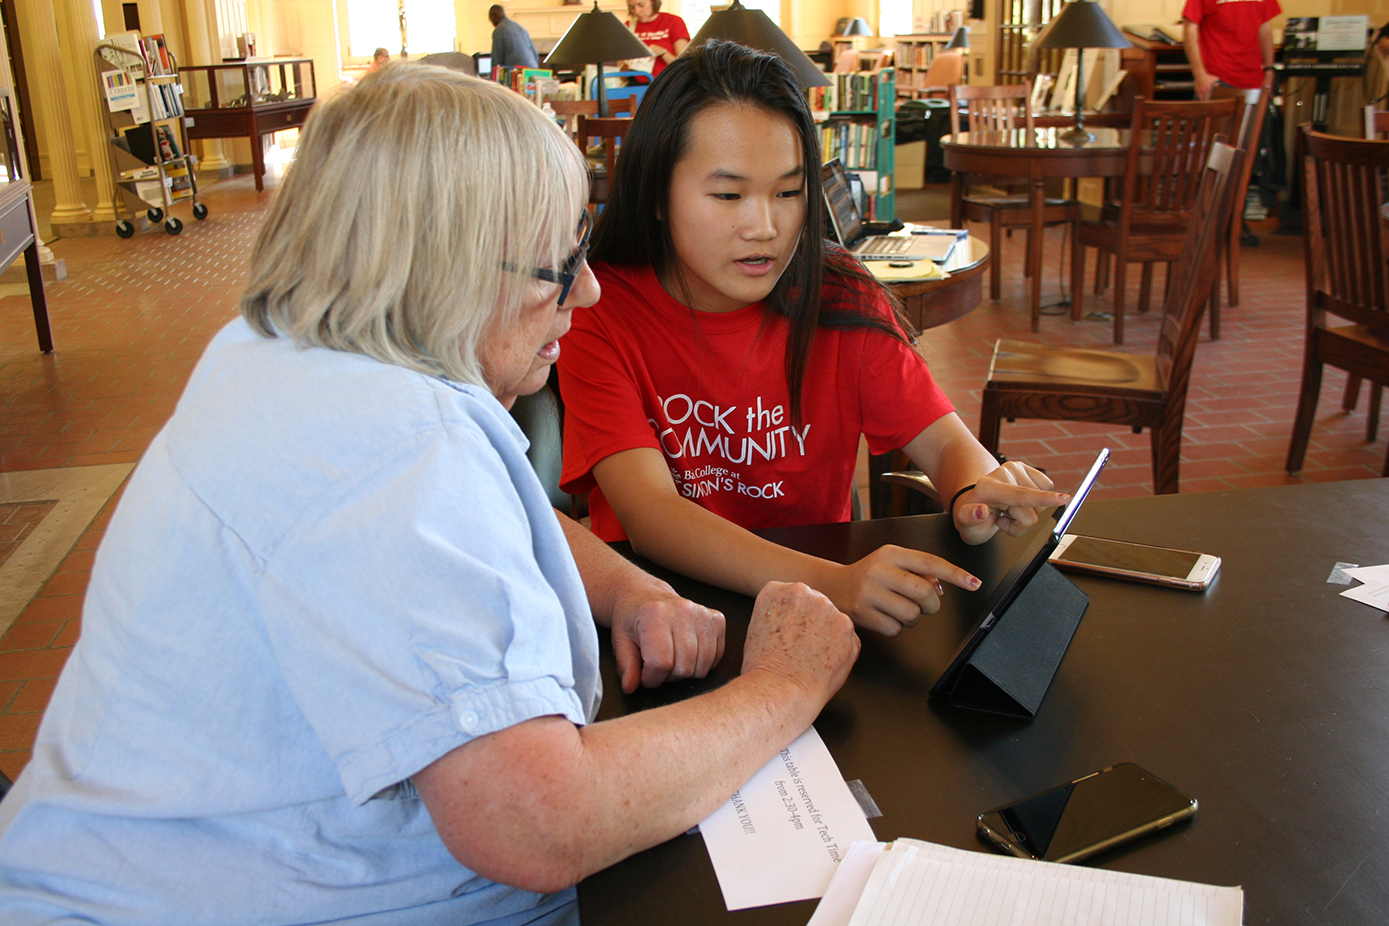 Simon's Rock student, Nancy Wen, volunteers at Mason Library for Rock the Community